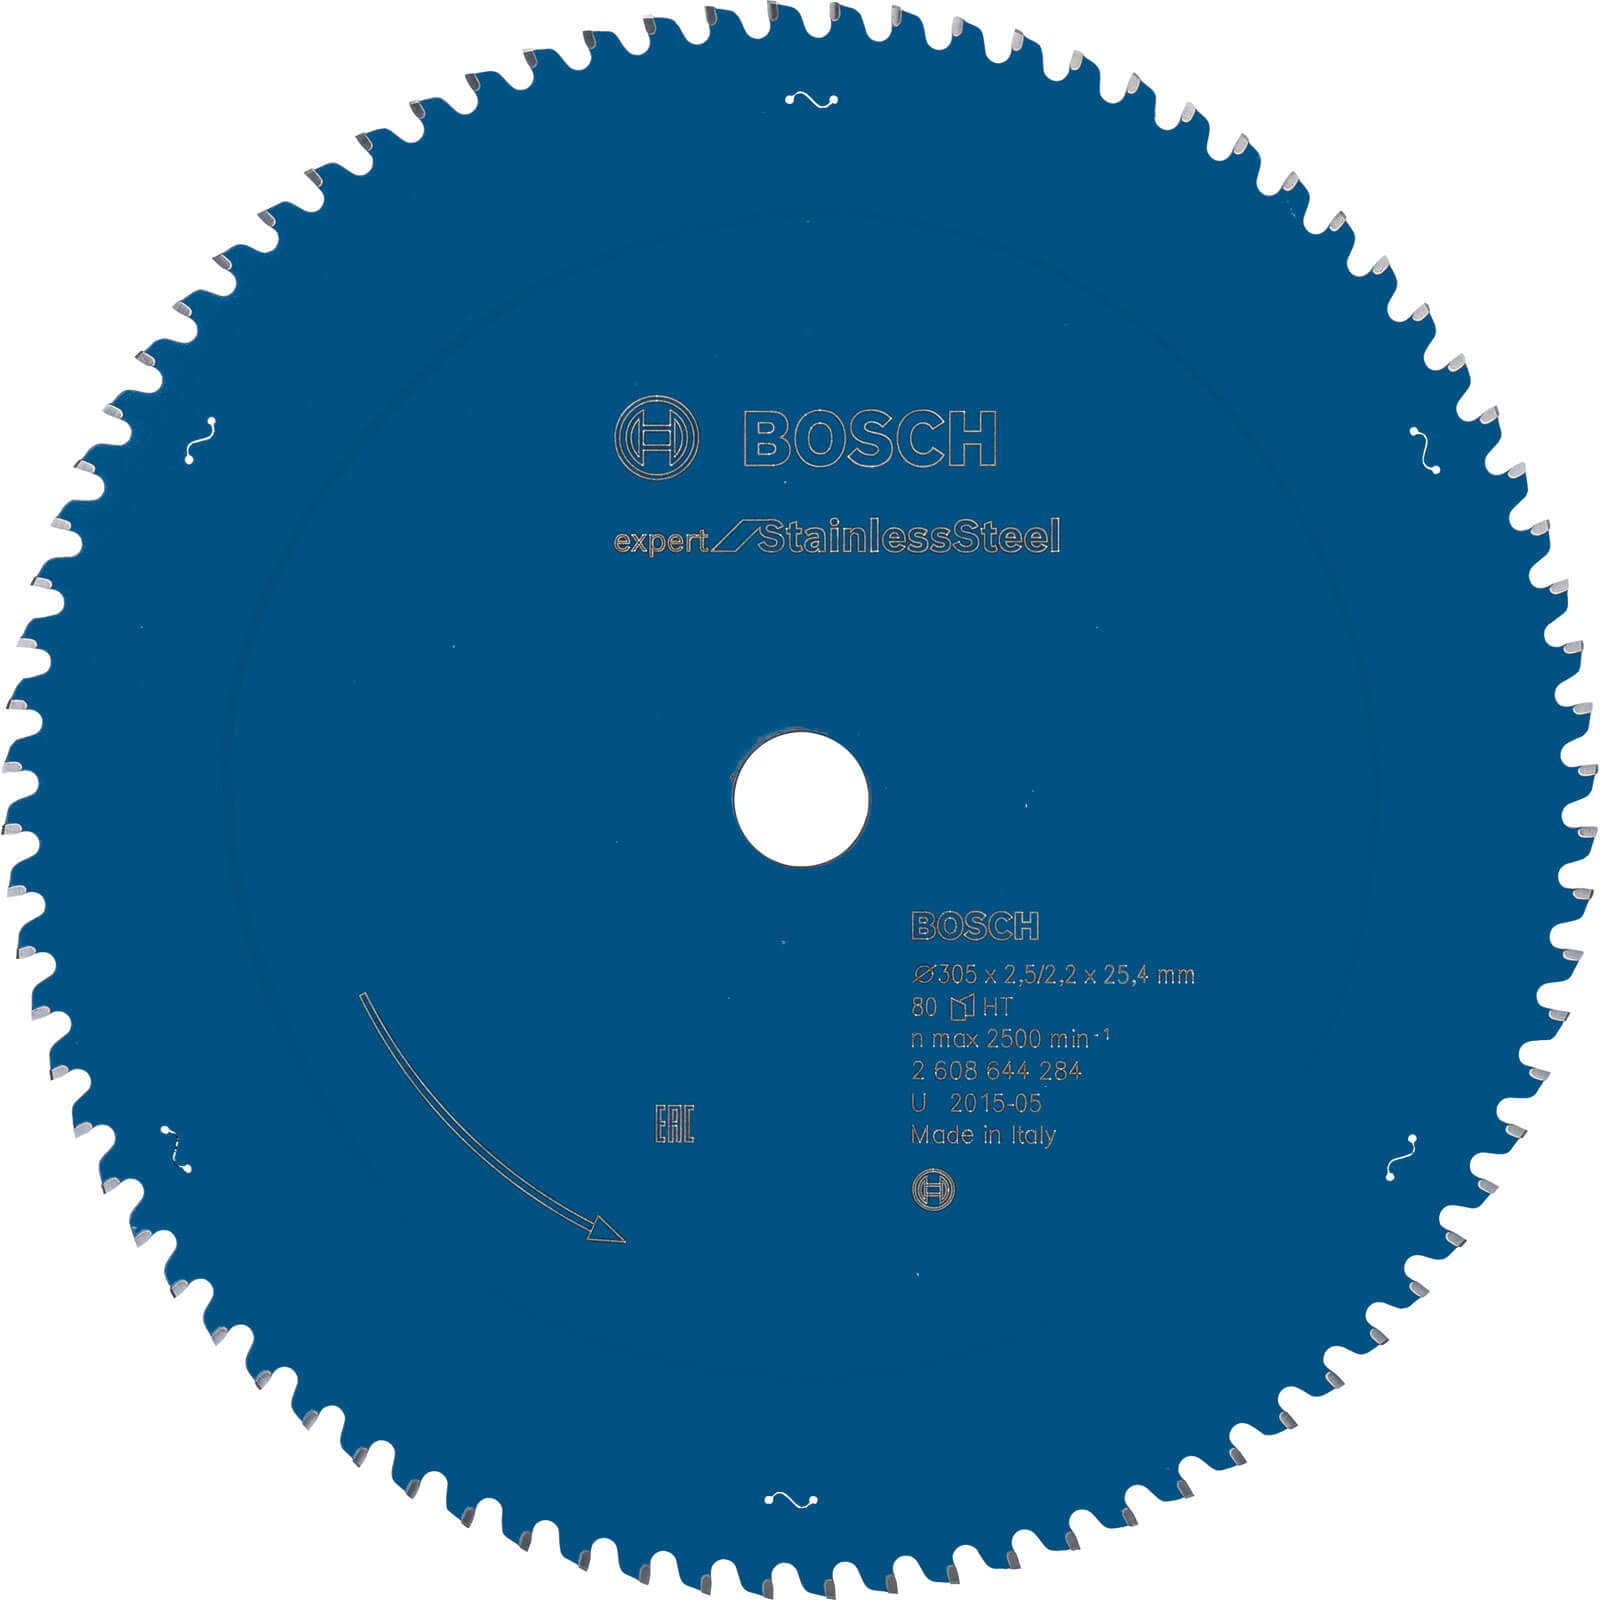 Photos - Power Tool Accessory Bosch Expert Stainless Steel Cutting Saw Blade 305mm 80T 25.4mm 2608644284 